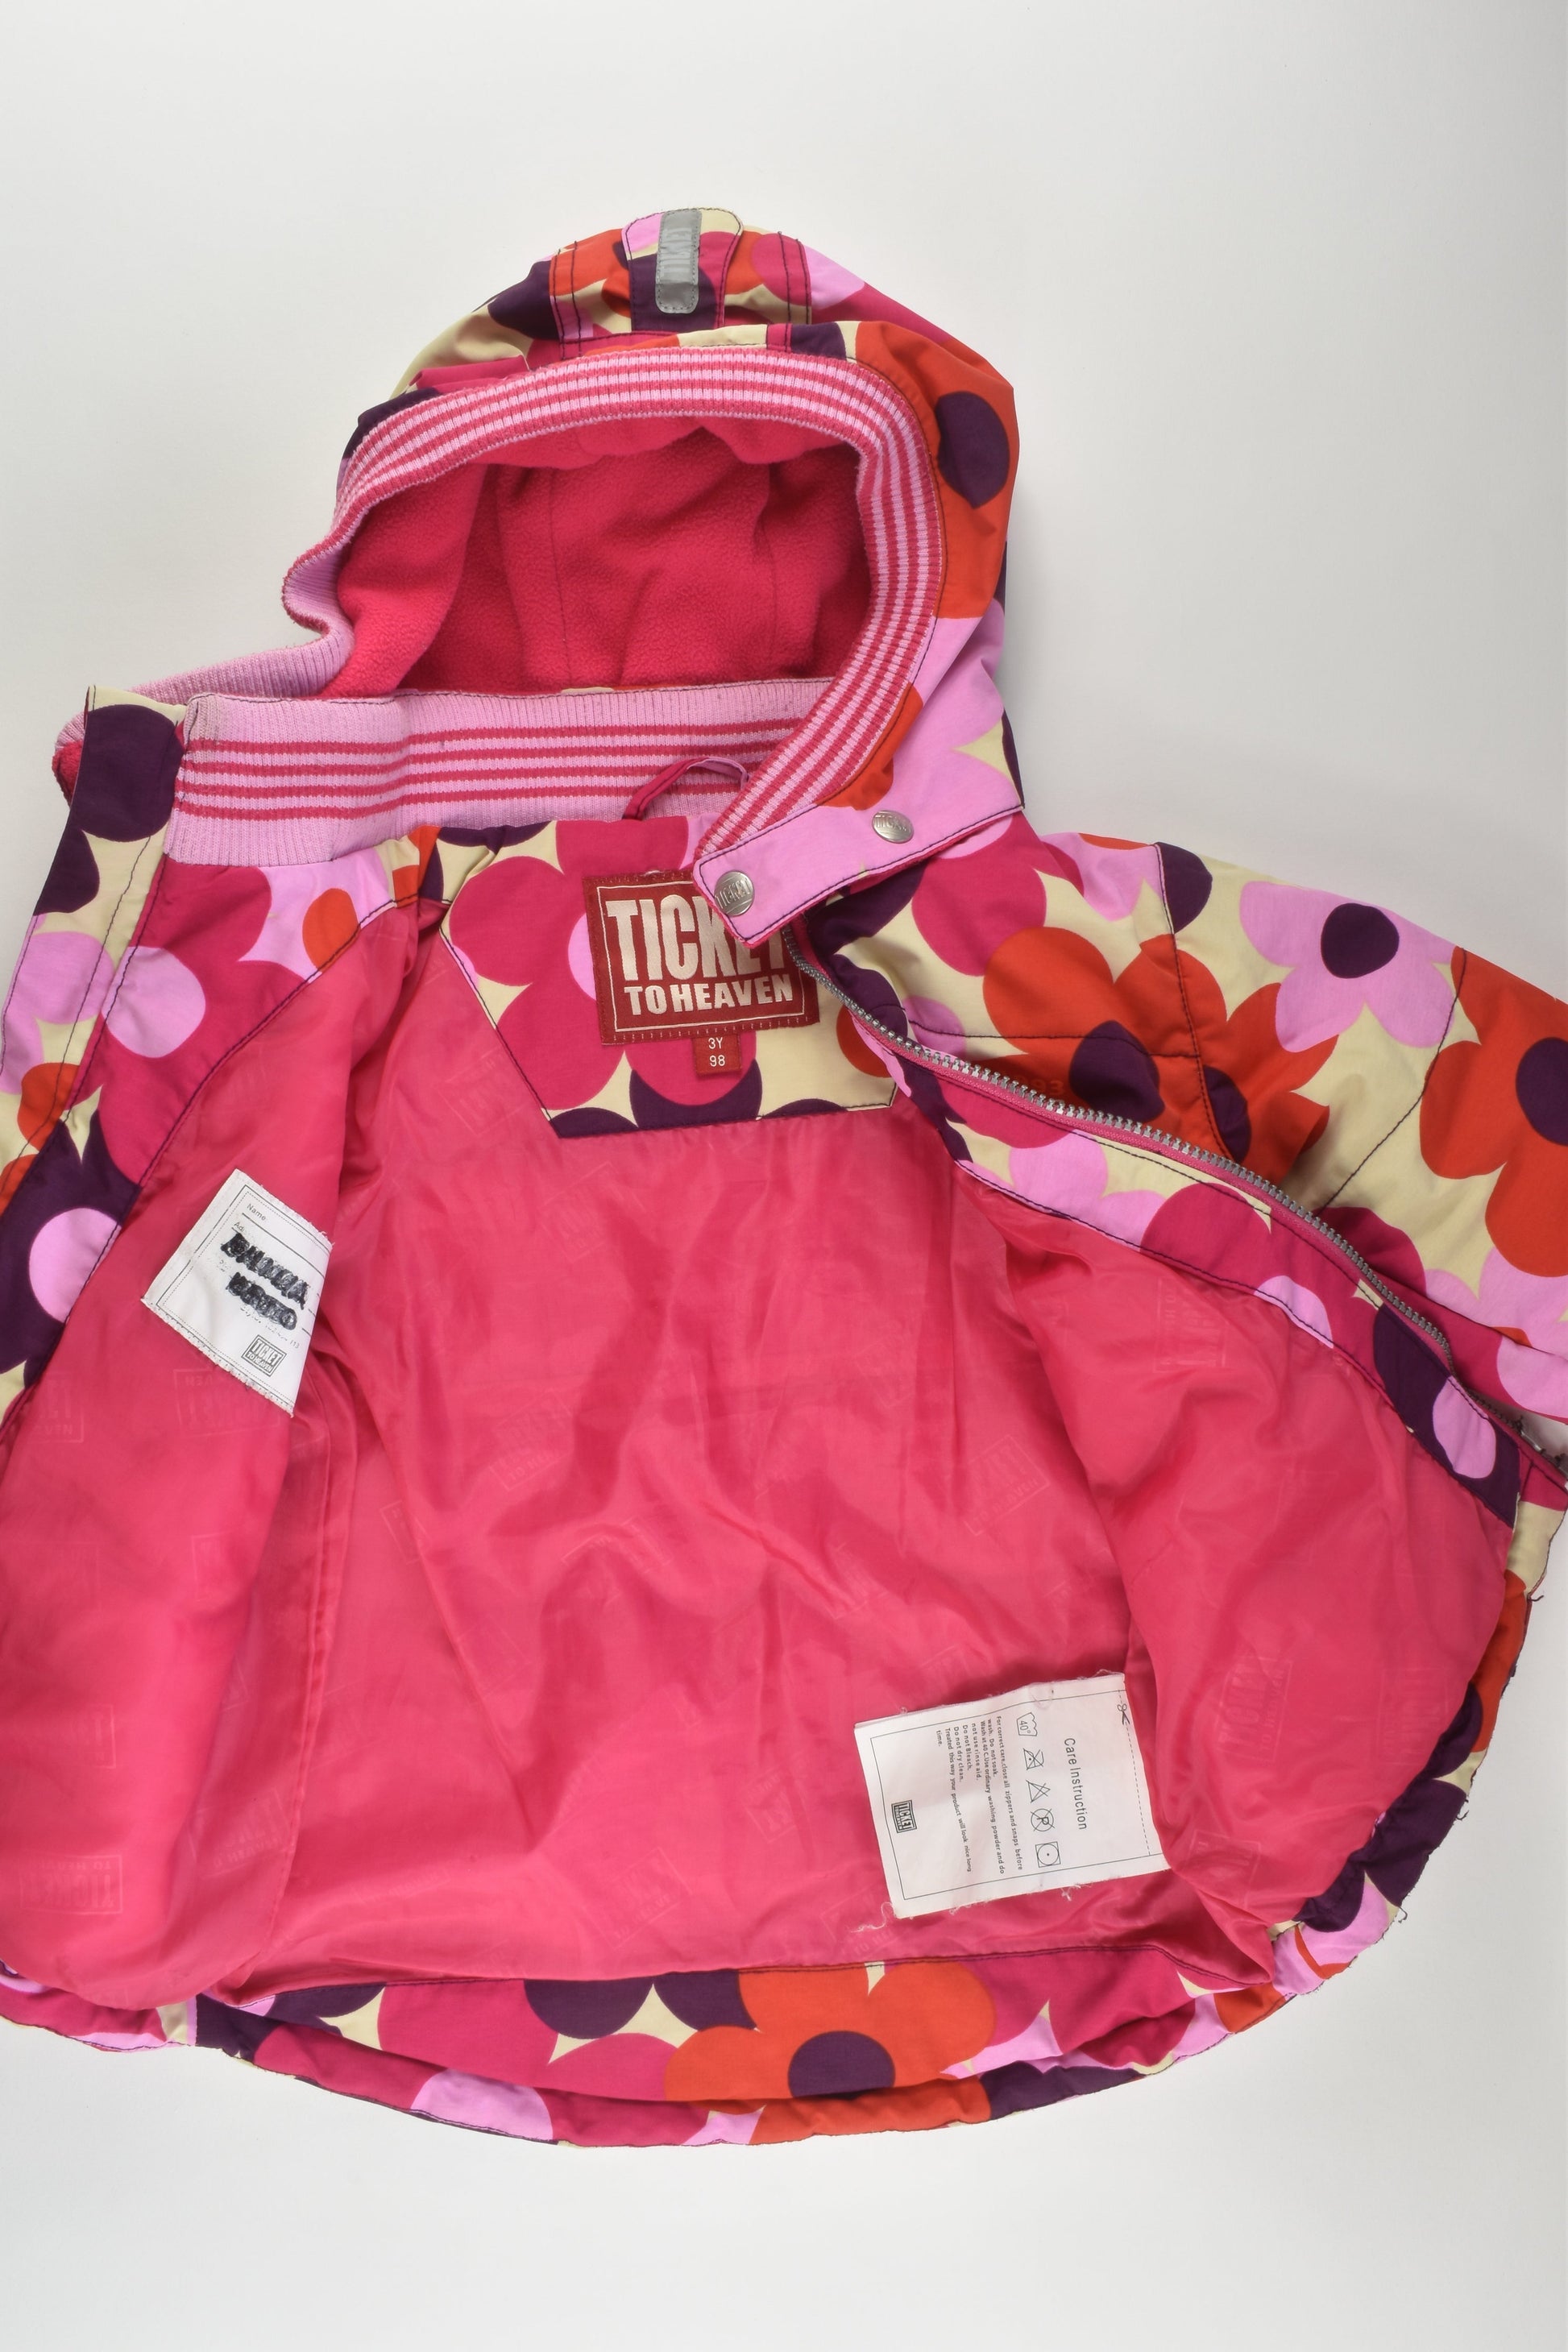 Ticket To Heaven Size 3 (98 cm) Puffer Jacket